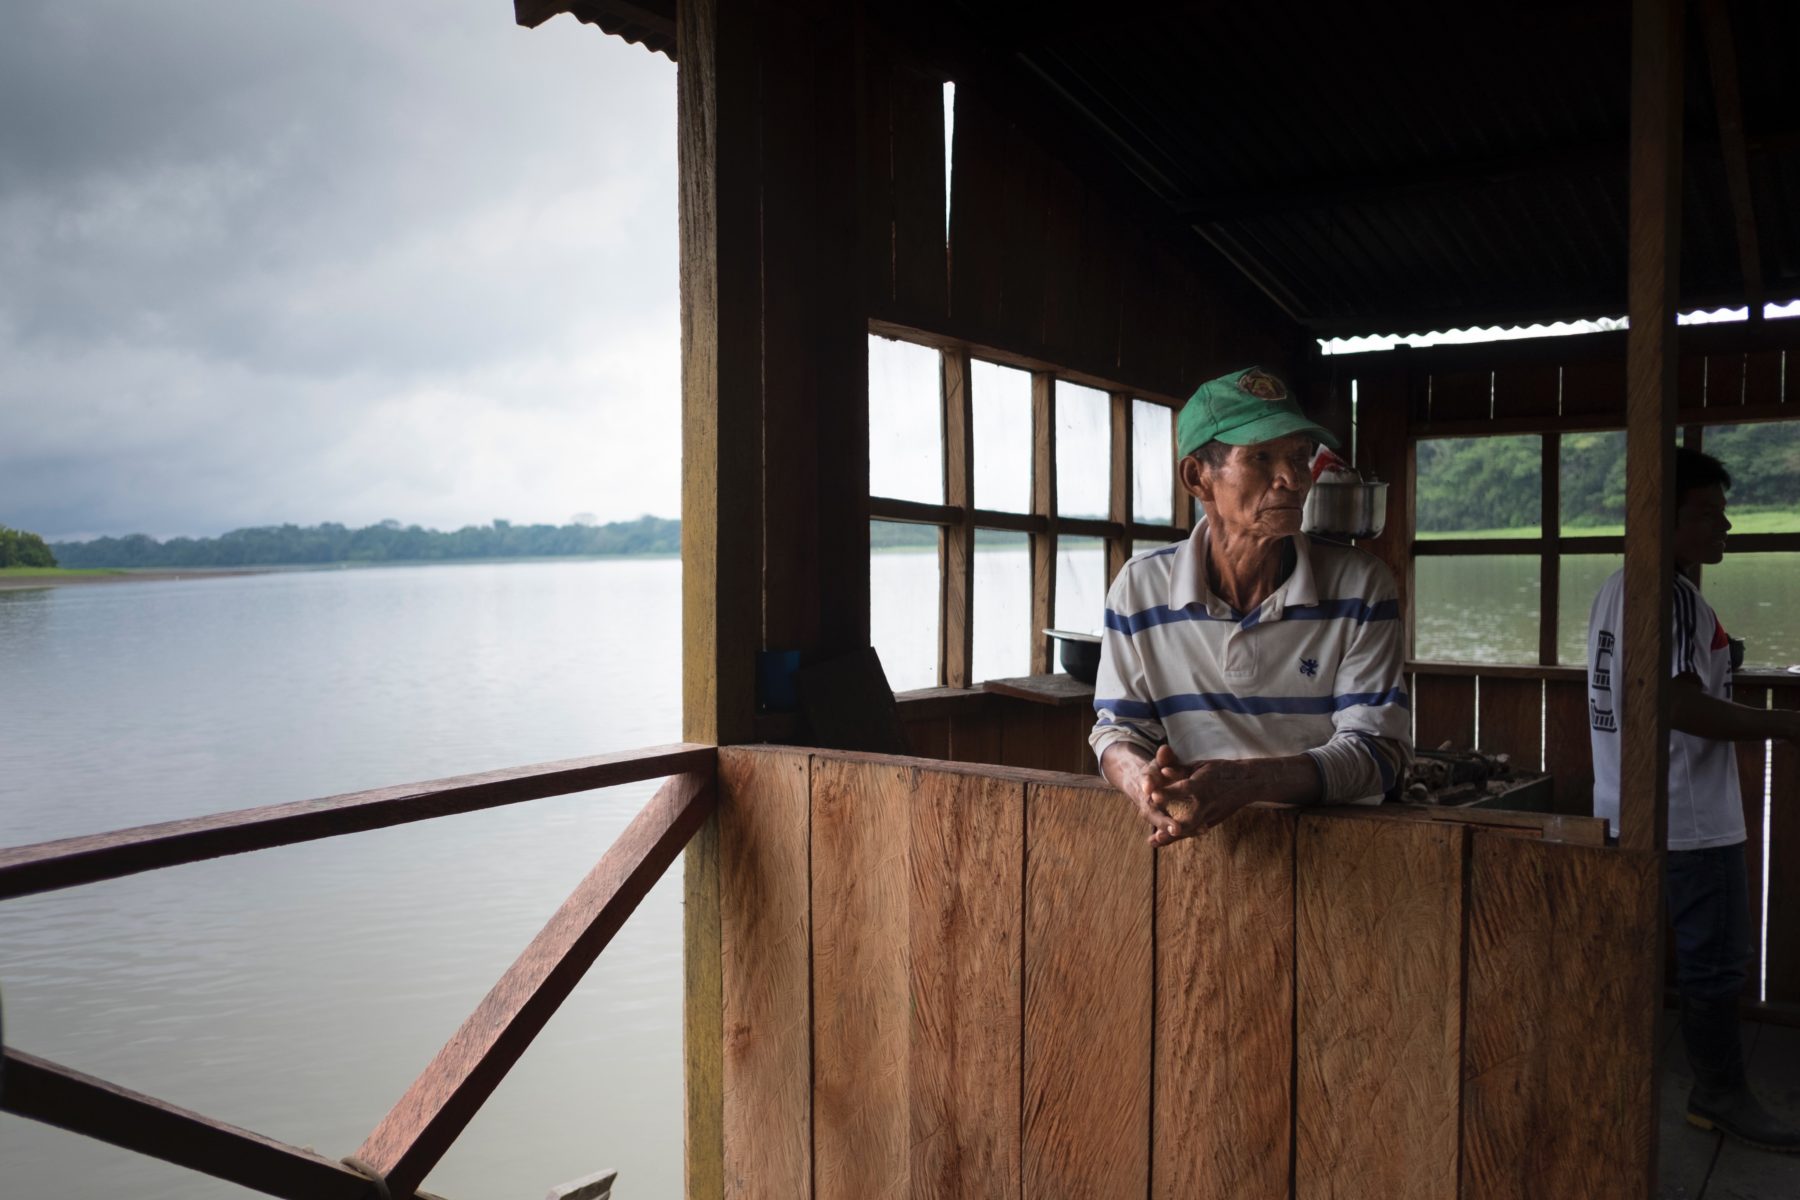 An Colombian local wearing a green hat sitting by the Amazon river.